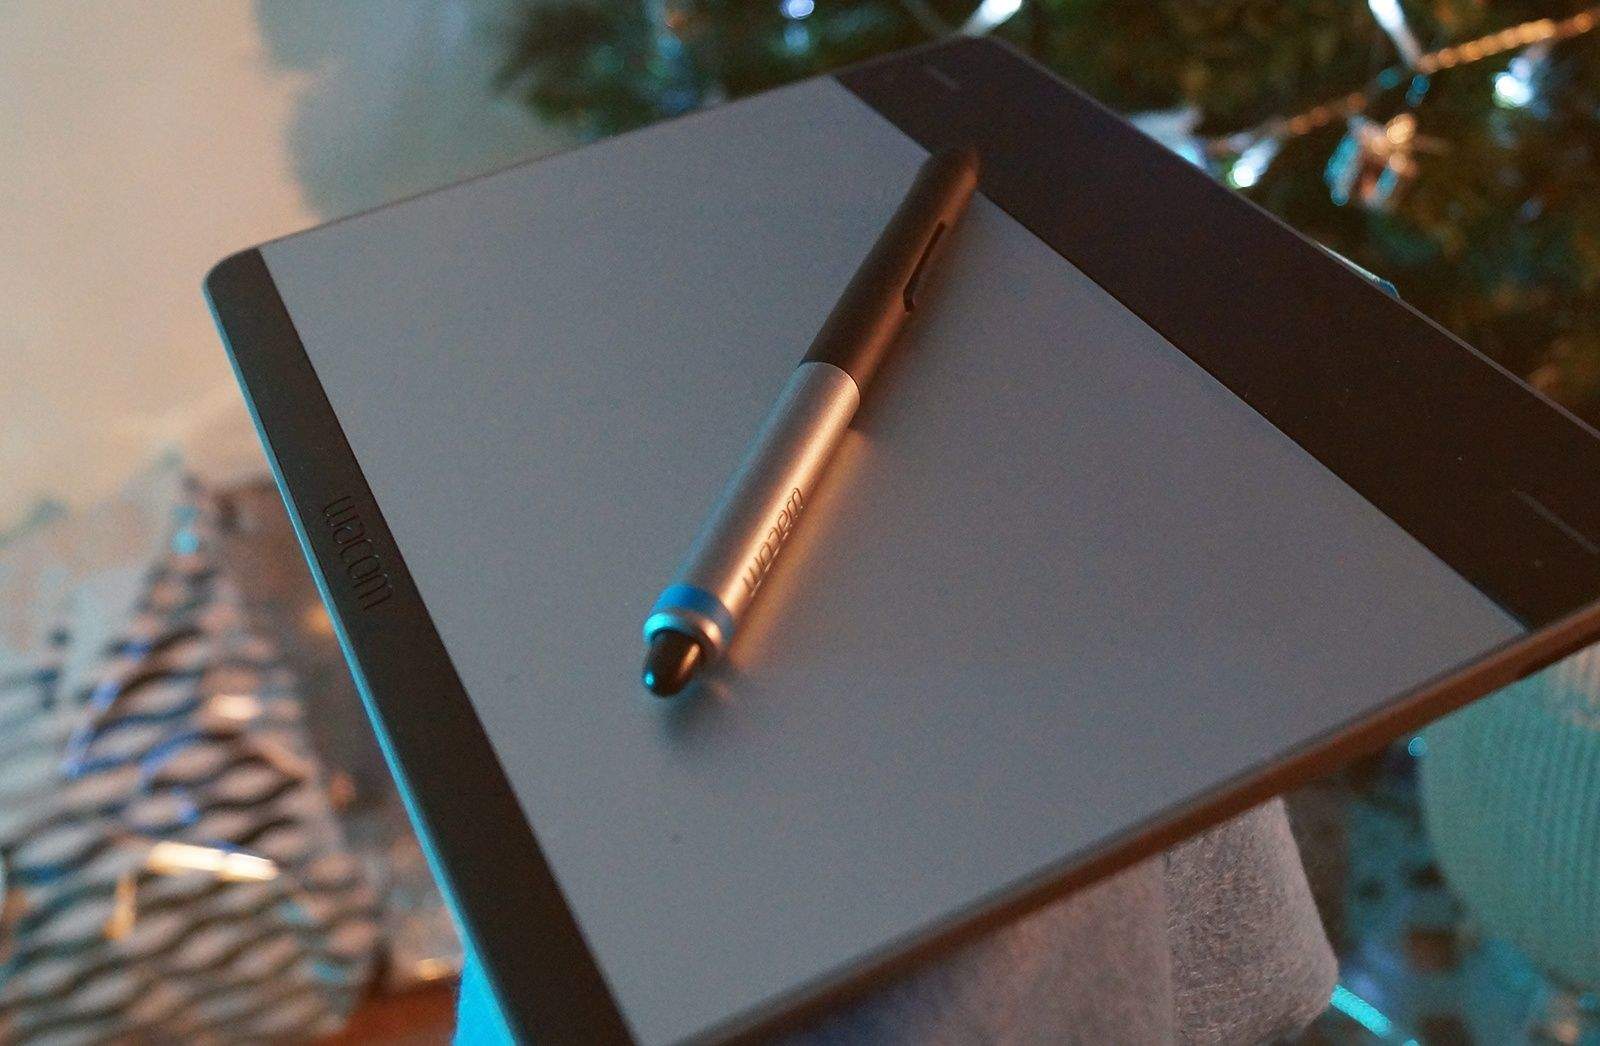 The Wacom Intuos is like a touchpad you can draw on. Photo: Ste Smith/Cult of Mac